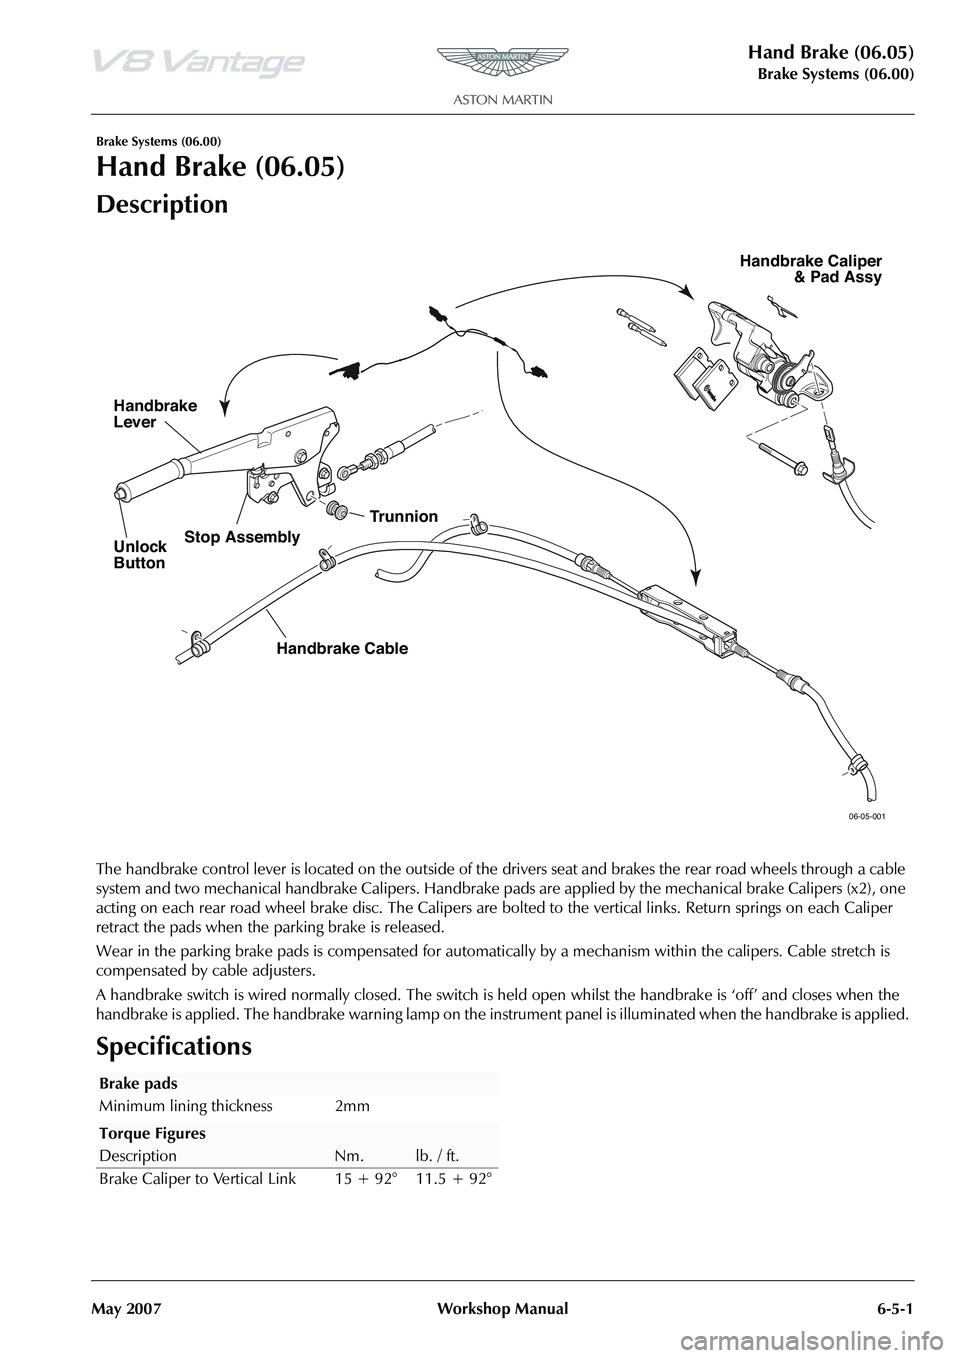 ASTON MARTIN V8 VANTAGE 2010 Owners Guide Hand Brake (06.05)
Brake Systems (06.00)
May 2007 Workshop Manual 6-5-1
Brake Systems (06.00)
Hand Brake (06.05)
Description
The handbrake control lever is located on the outside of the  drivers seat 